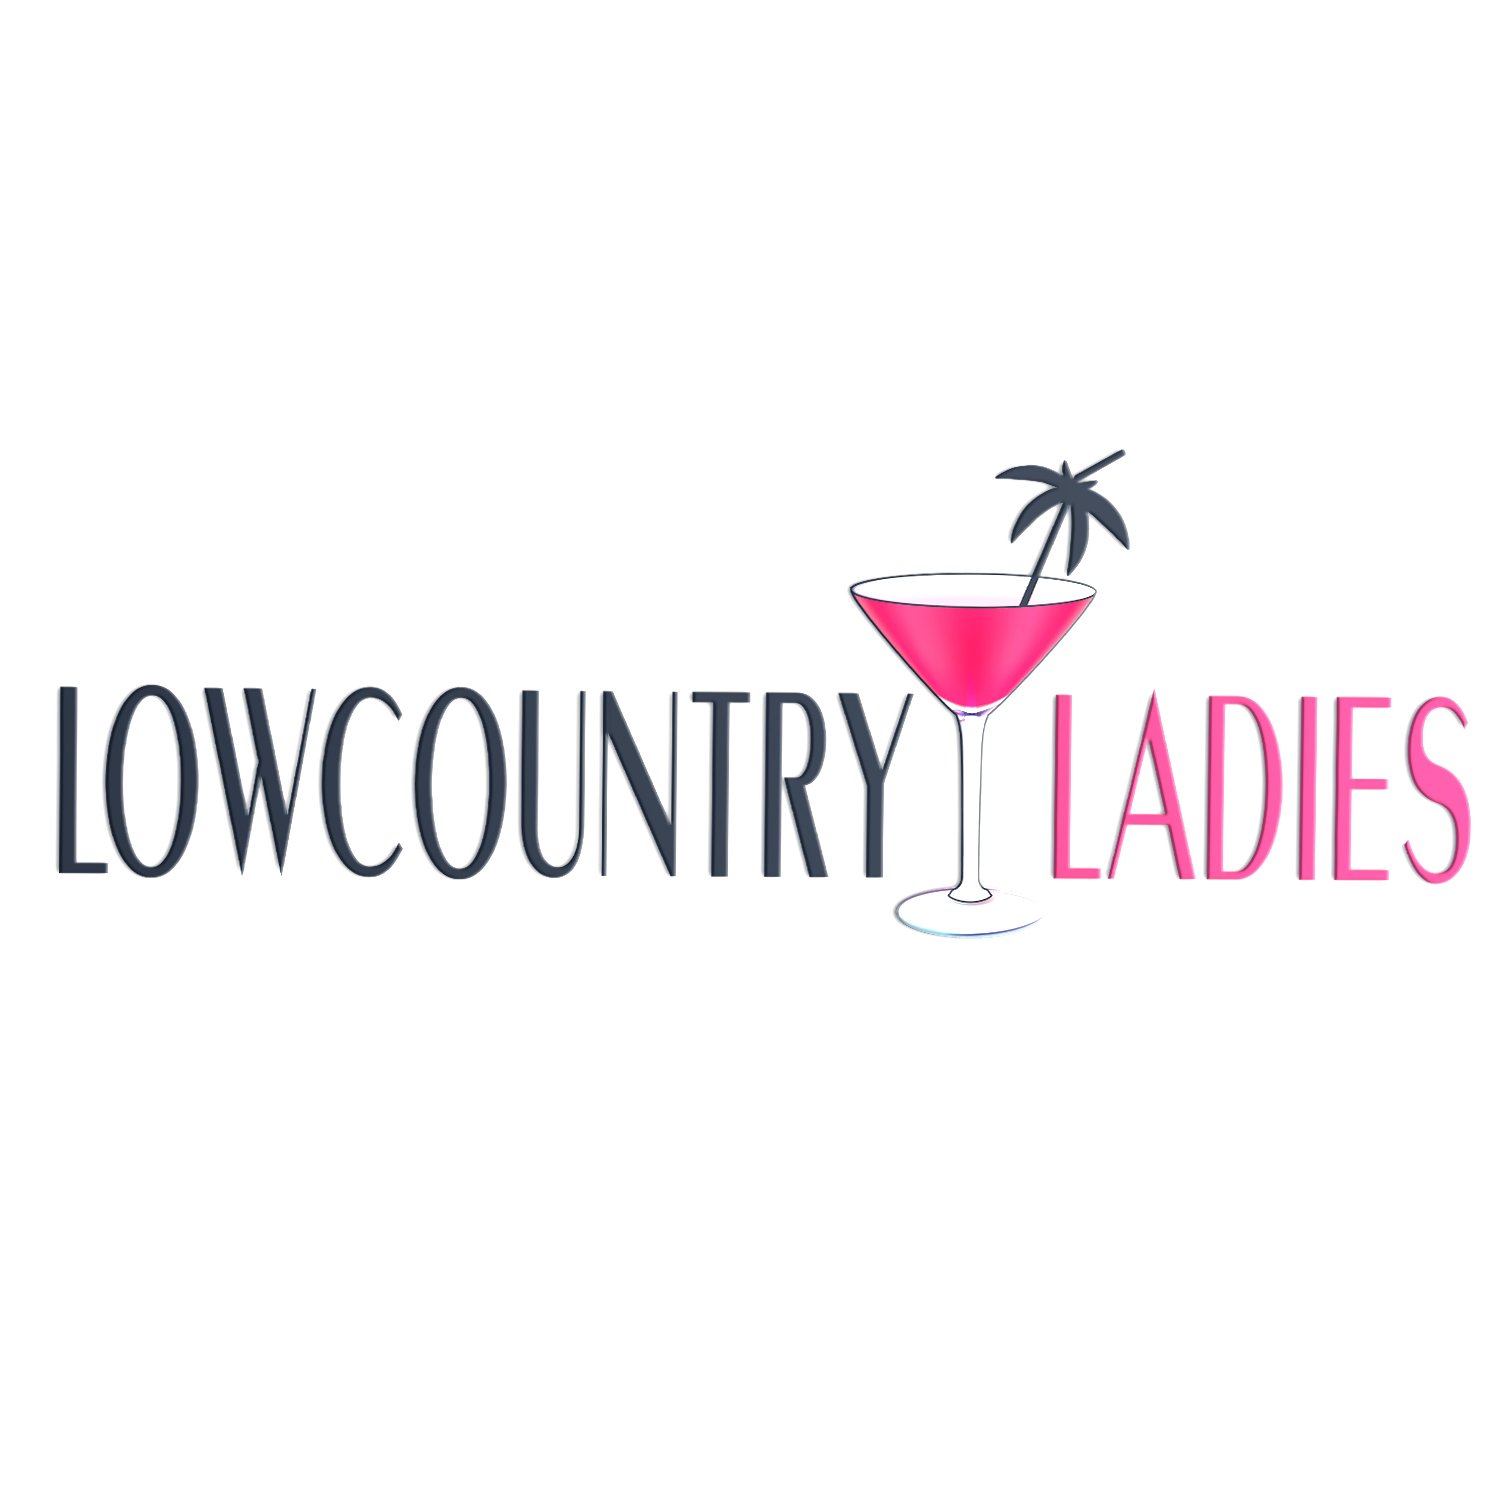 Lowcountry Ladies is the ladies' social club for the Charleston area. We host monthly cocktail events. All Ladies Welcome!